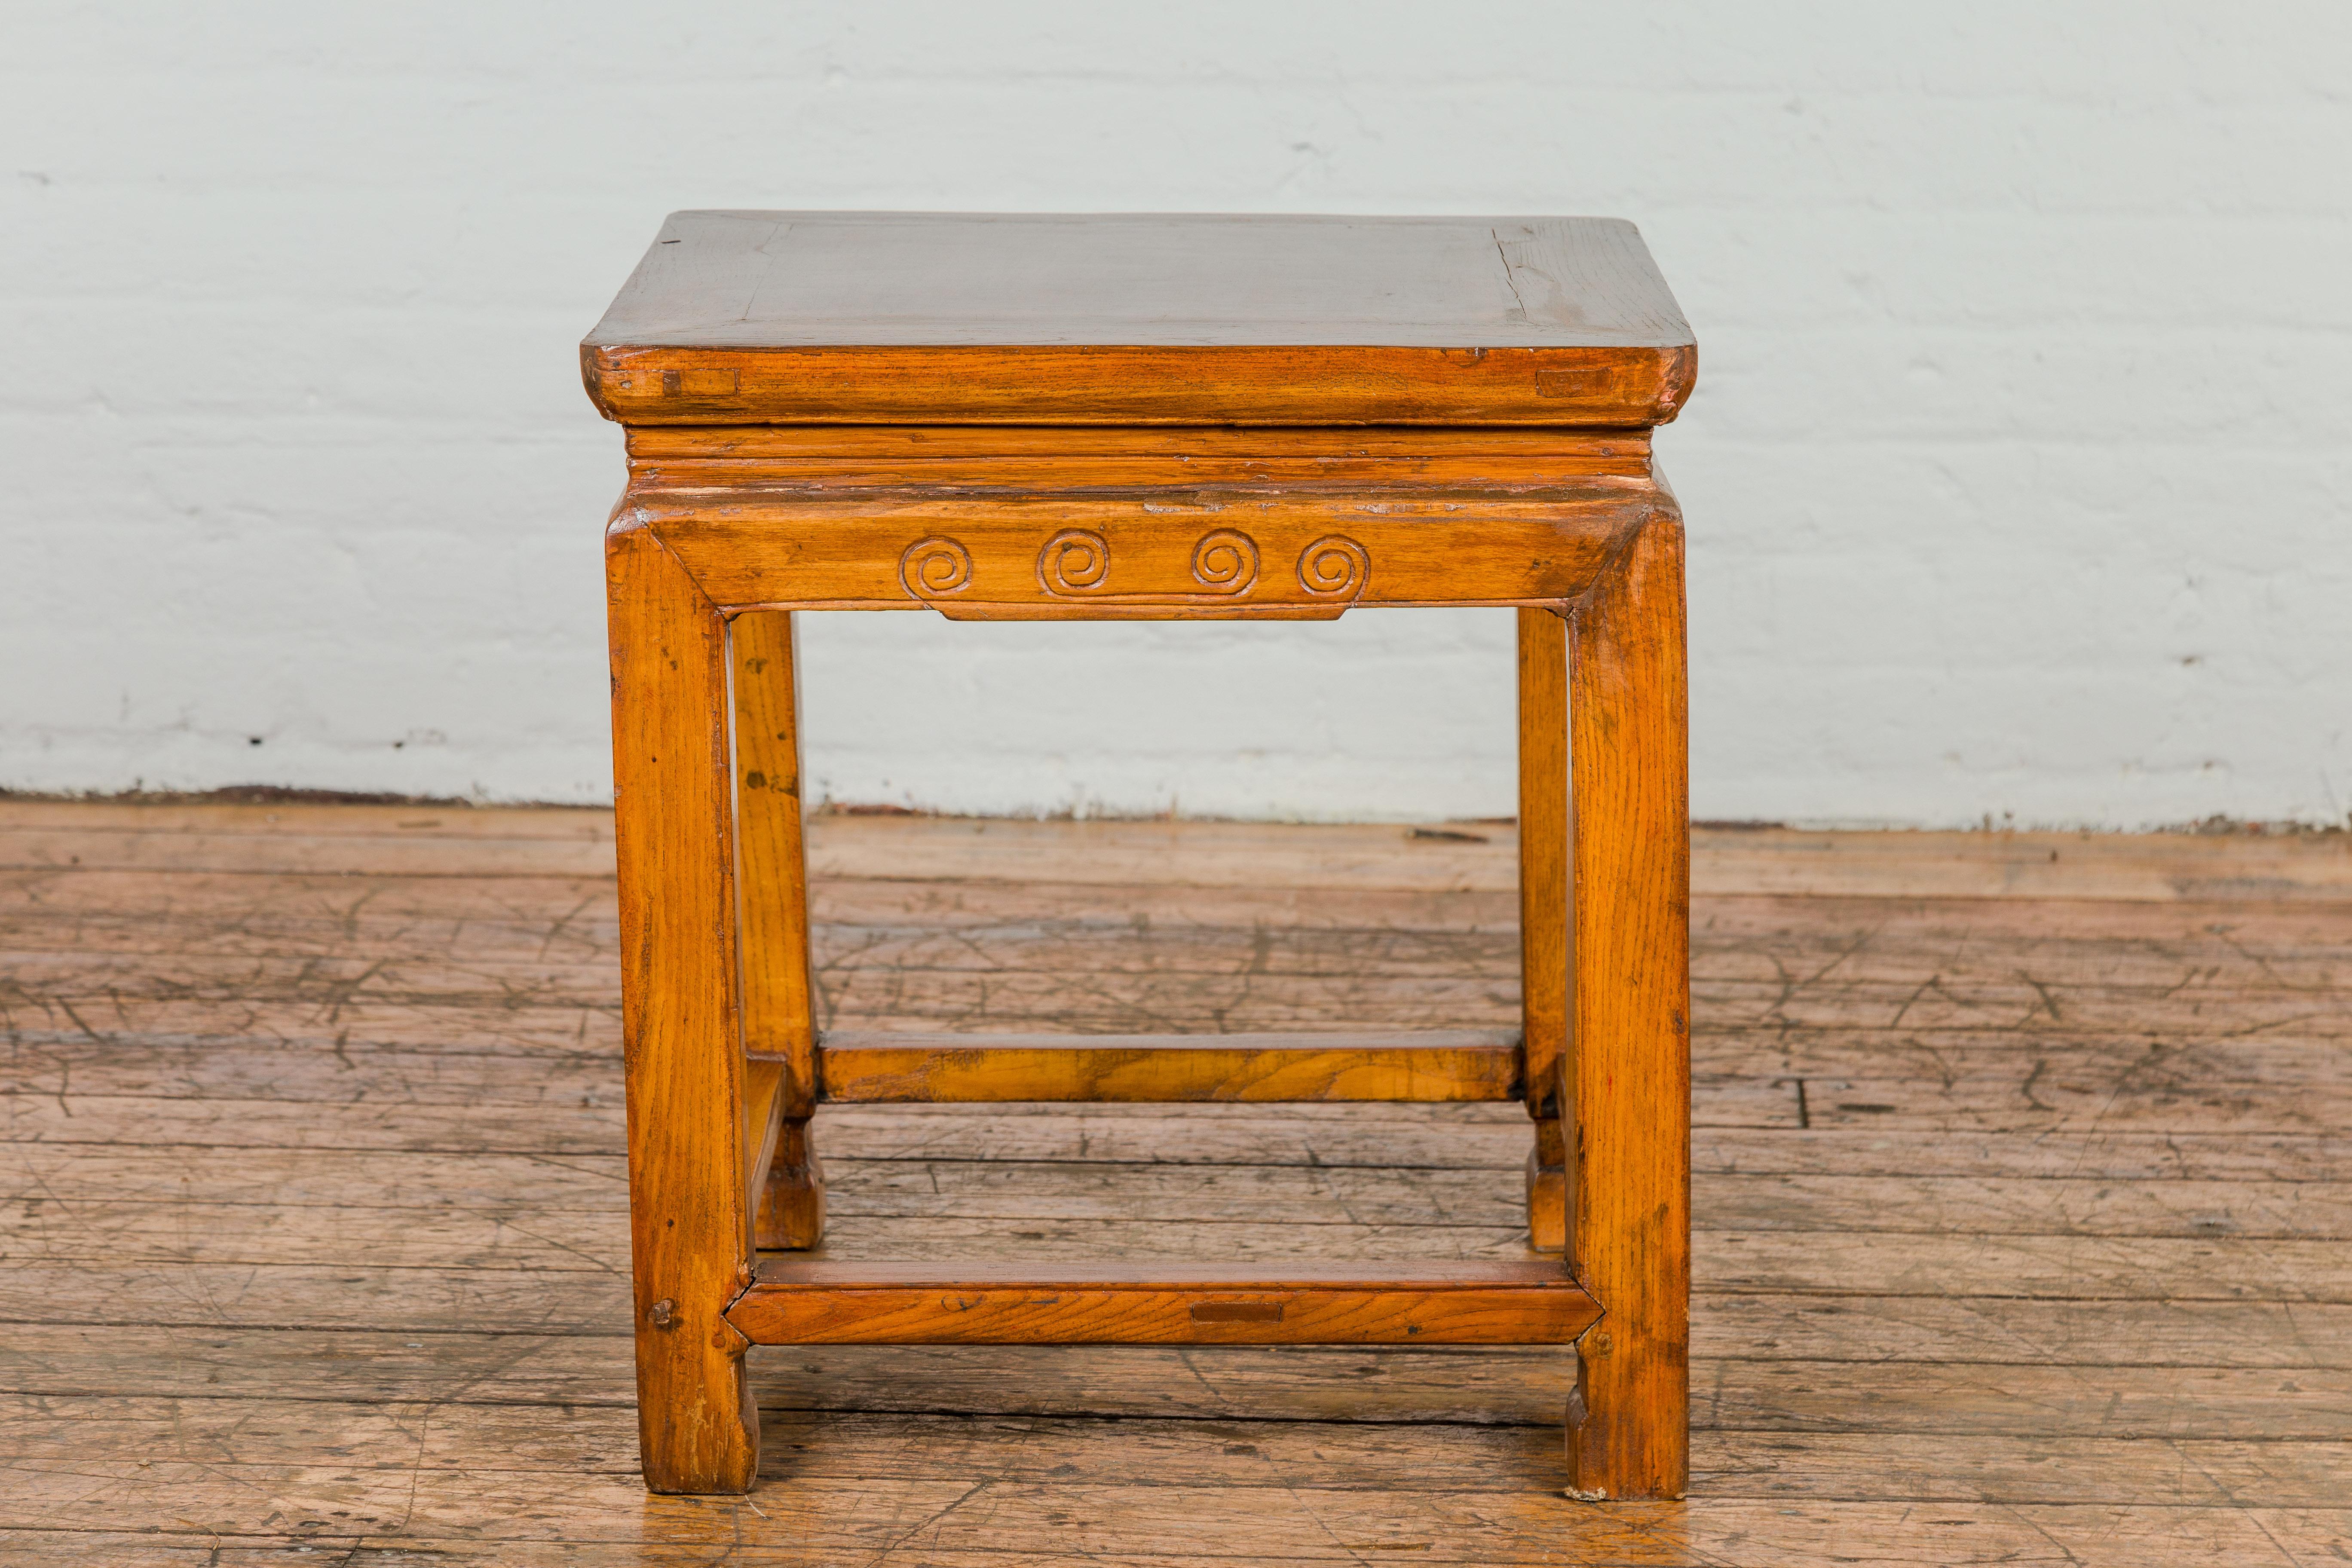 20th Century Chinese Elm Qing Dynasty Period Side Table with Horse Hoof Legs and Stretchers For Sale